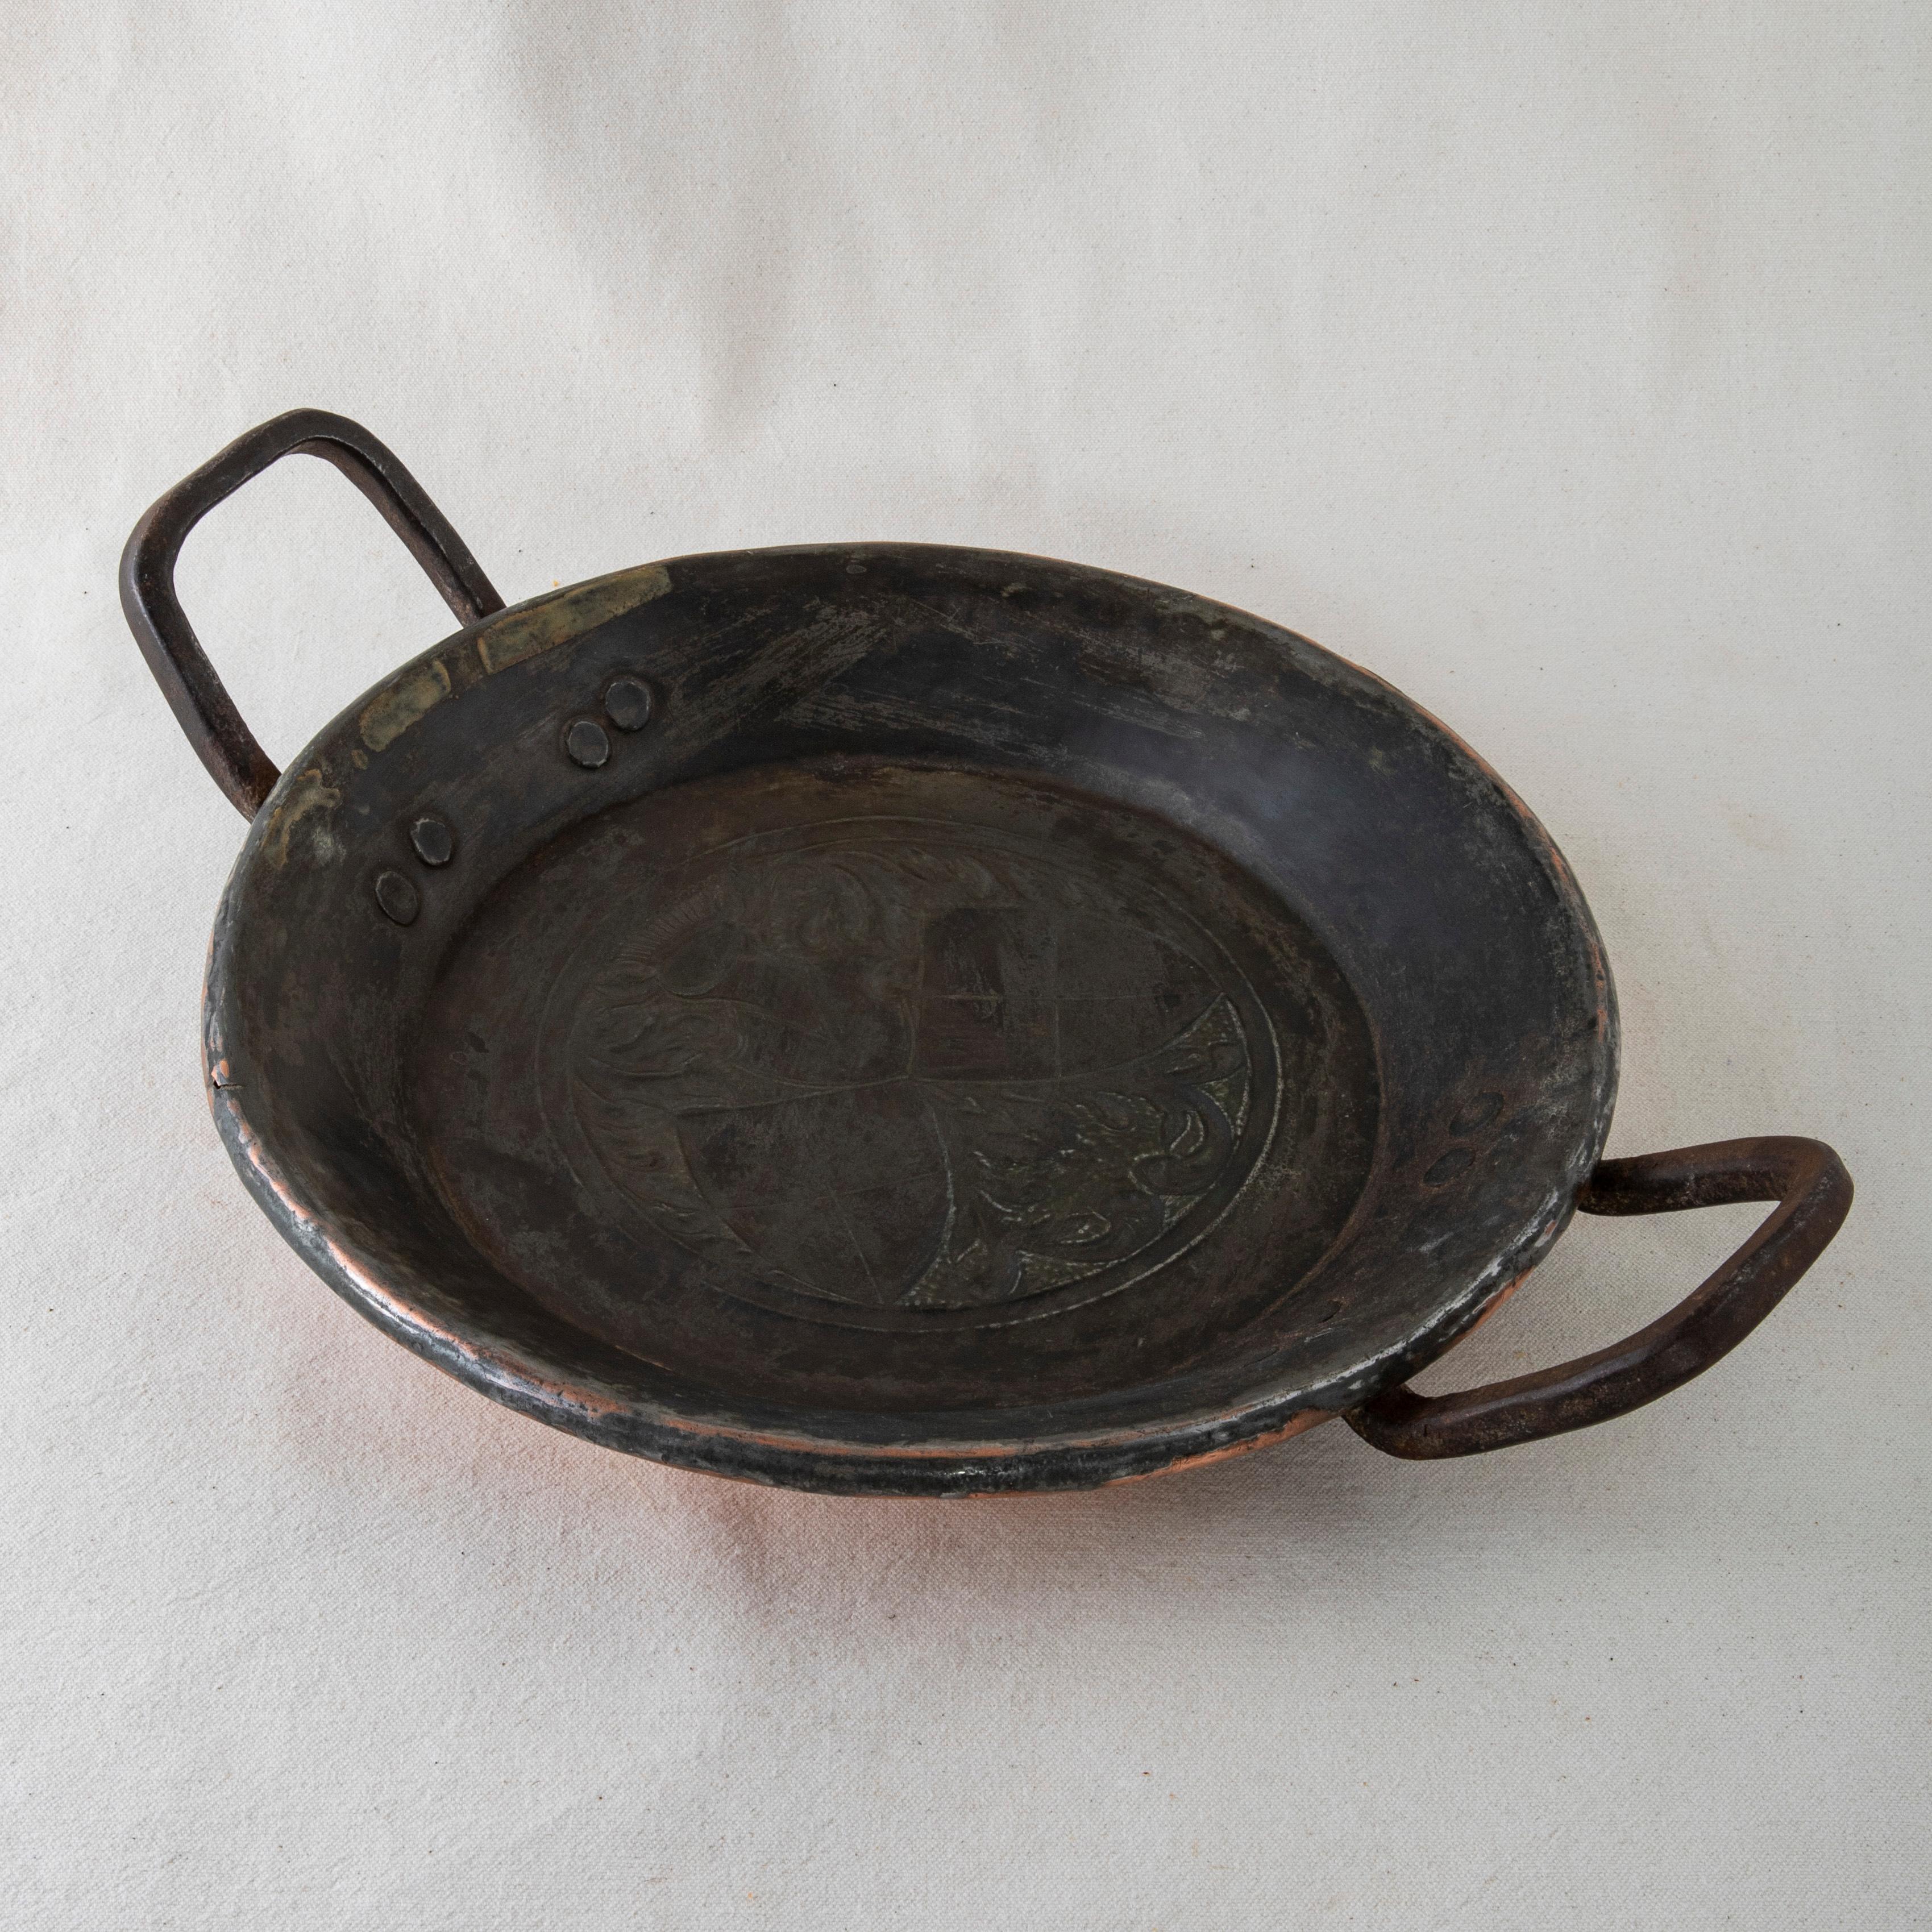 Repoussé Late 19th Century French Copper Repousse Tart Pan with Knight and Shields For Sale